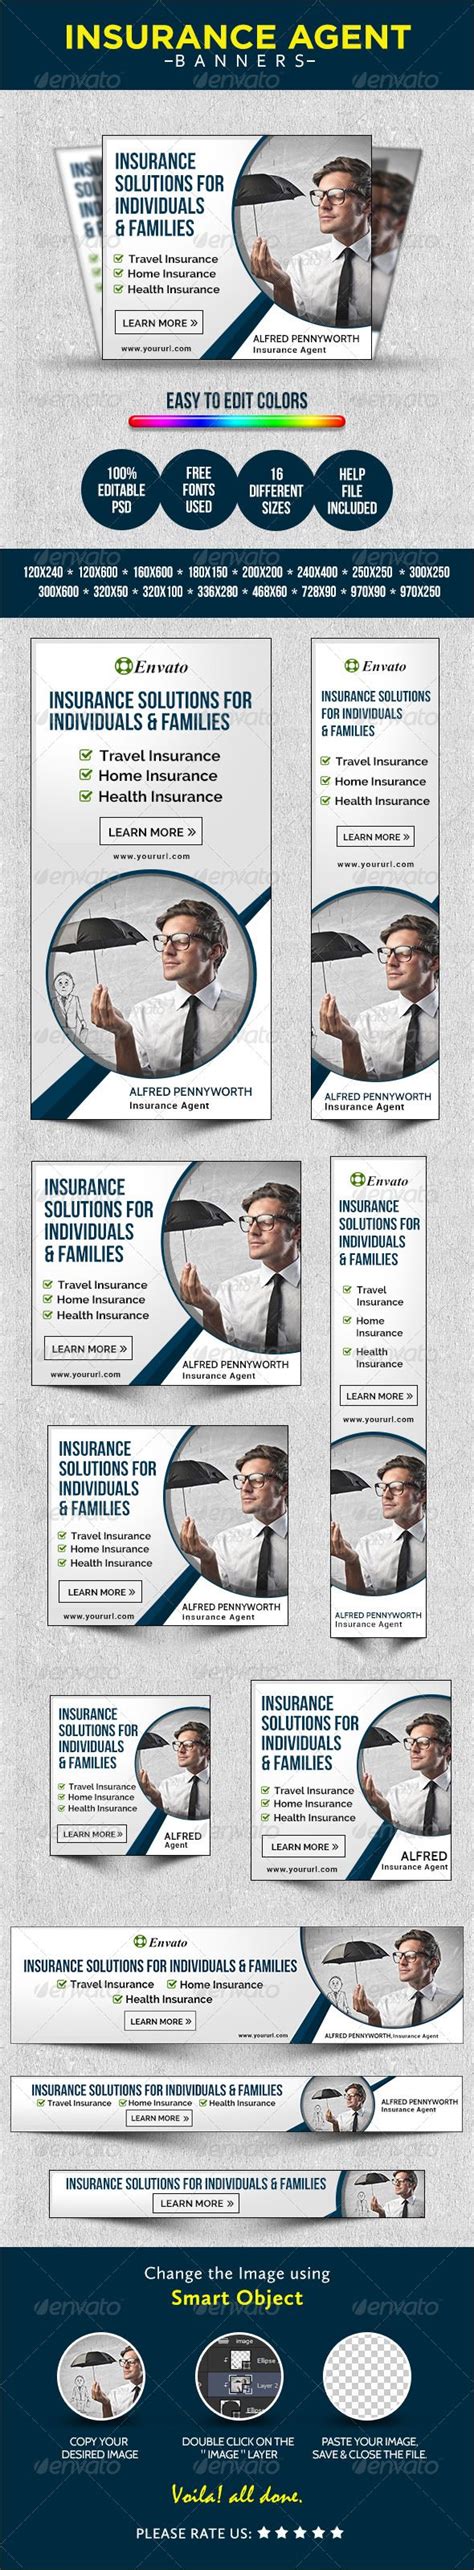 Jun 18, 2021 · banner life does not offer much in the way of online tools or other convenience features. Banner Design for Insurance Agents | Banner design, Web banner design, Adwords banner